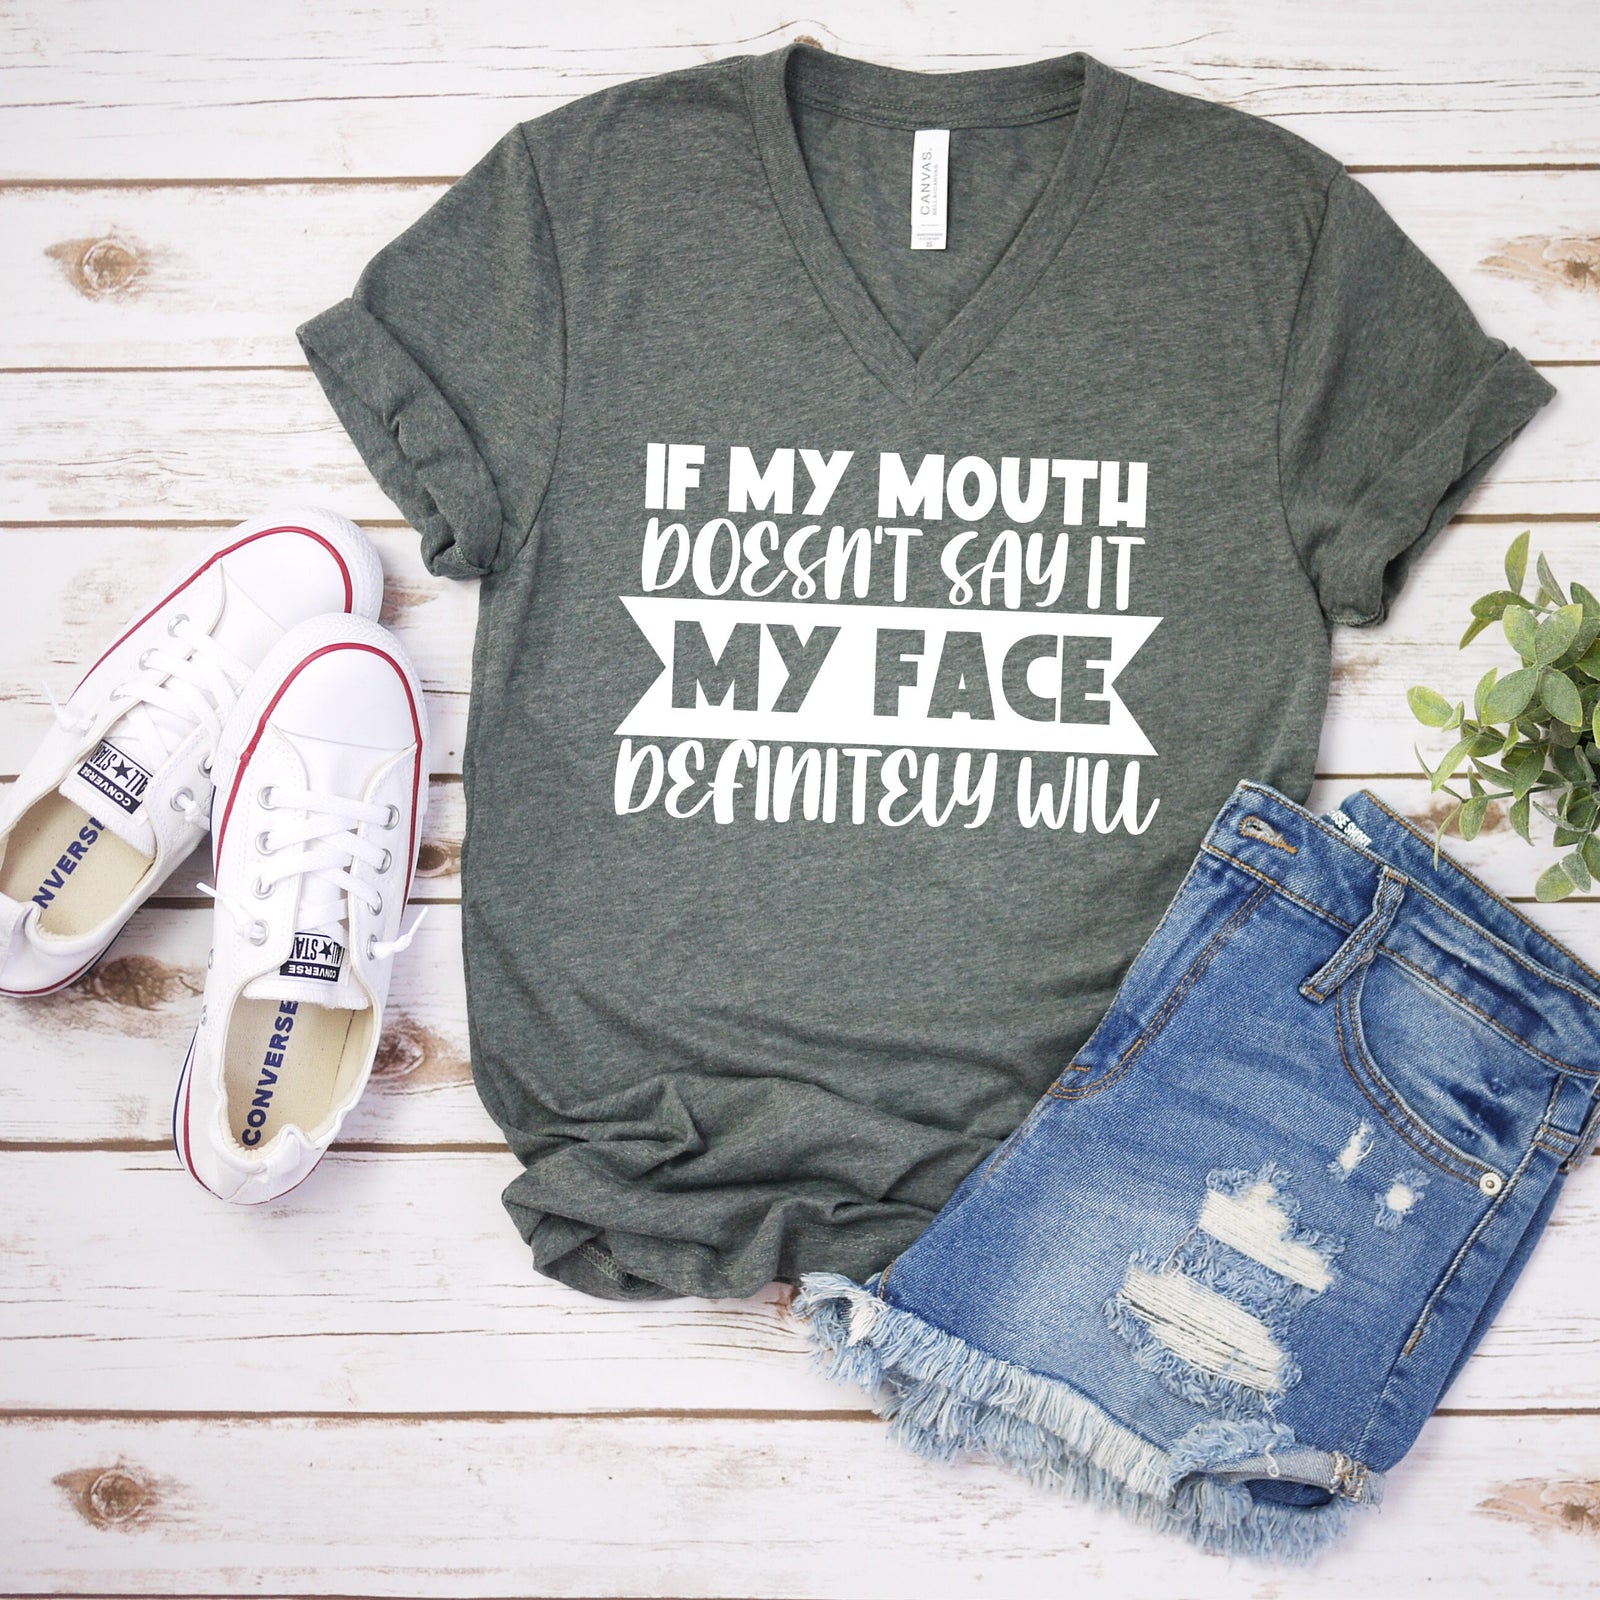 If My Mouth Doesn't Say It My Face Definitely Will T Shirt - Funny Sarcastic T Shirt - Humor Shirt